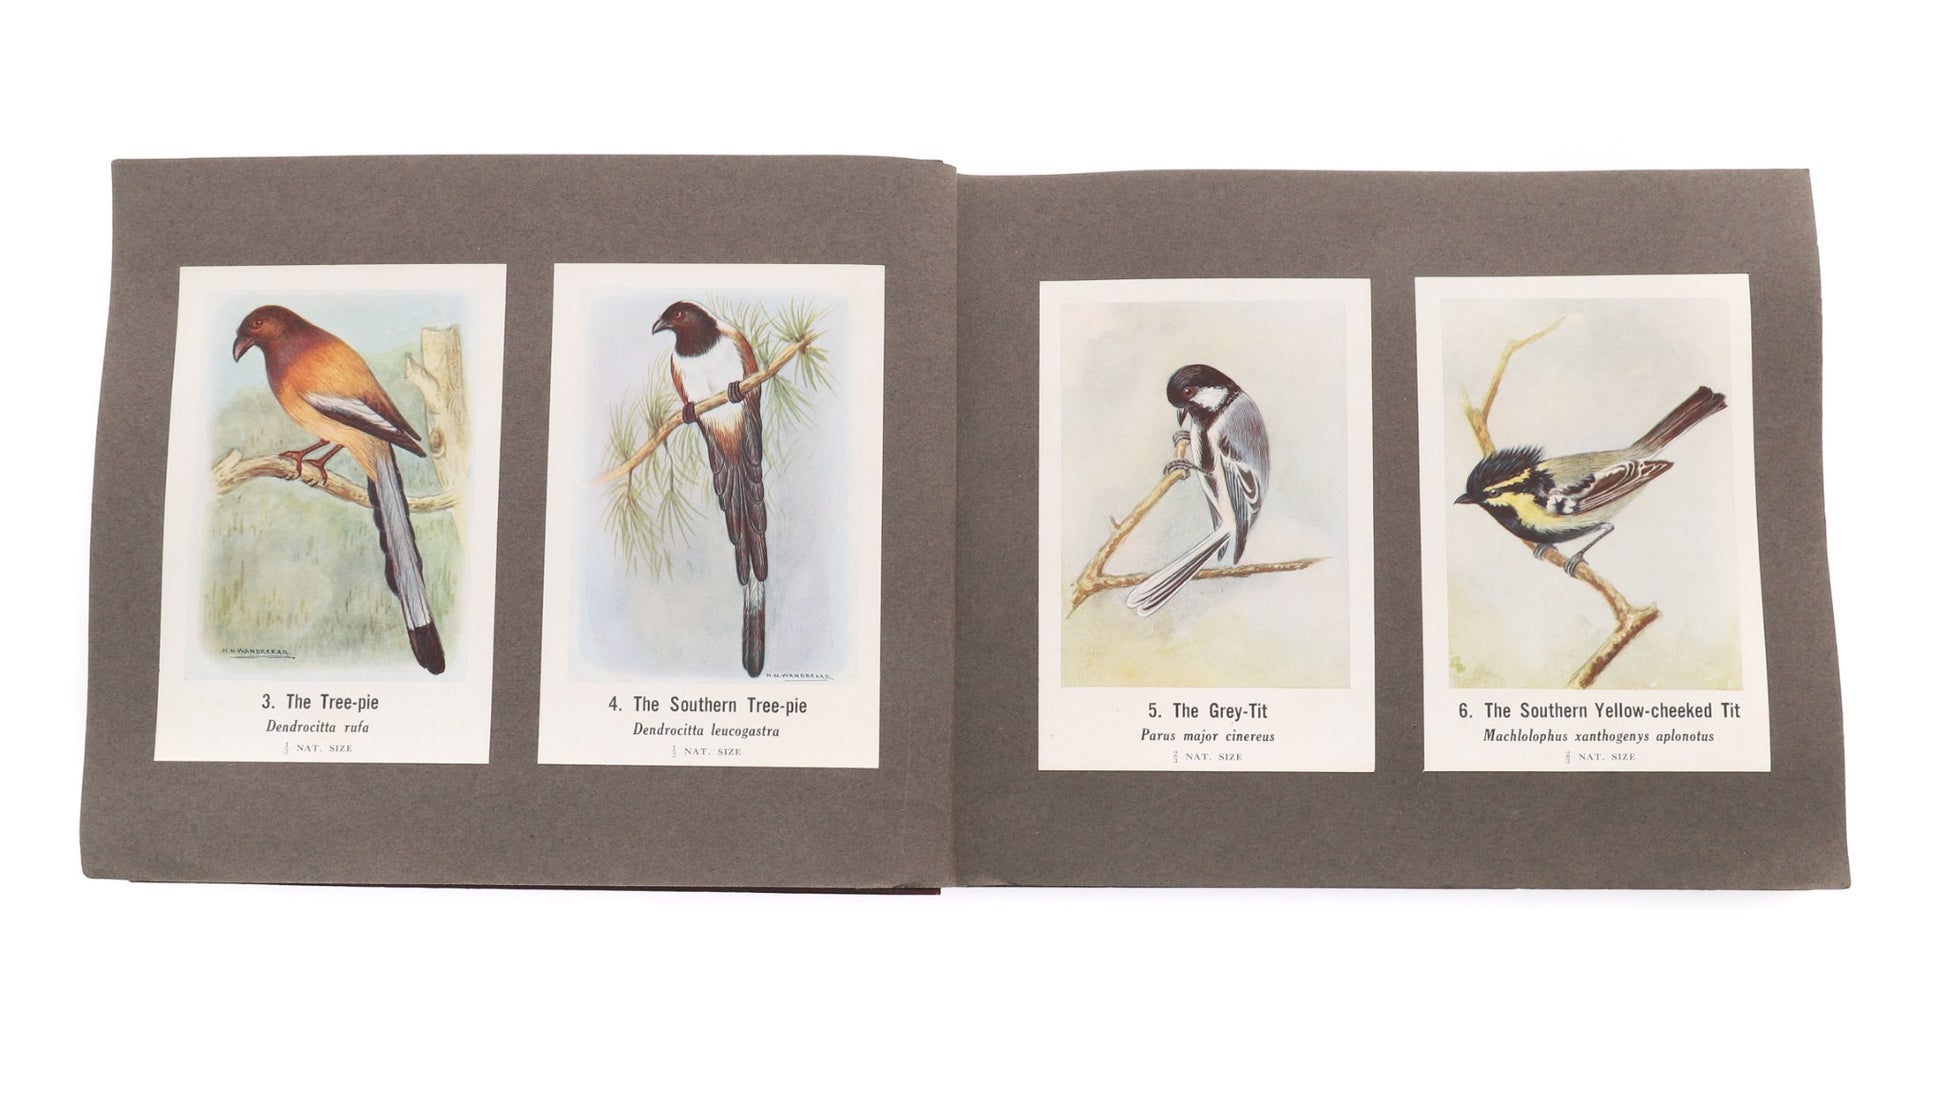 The Sind Natural History Society 1933 - Common Indian Birds - 196 Lithographs - Dahlströms Fine Art